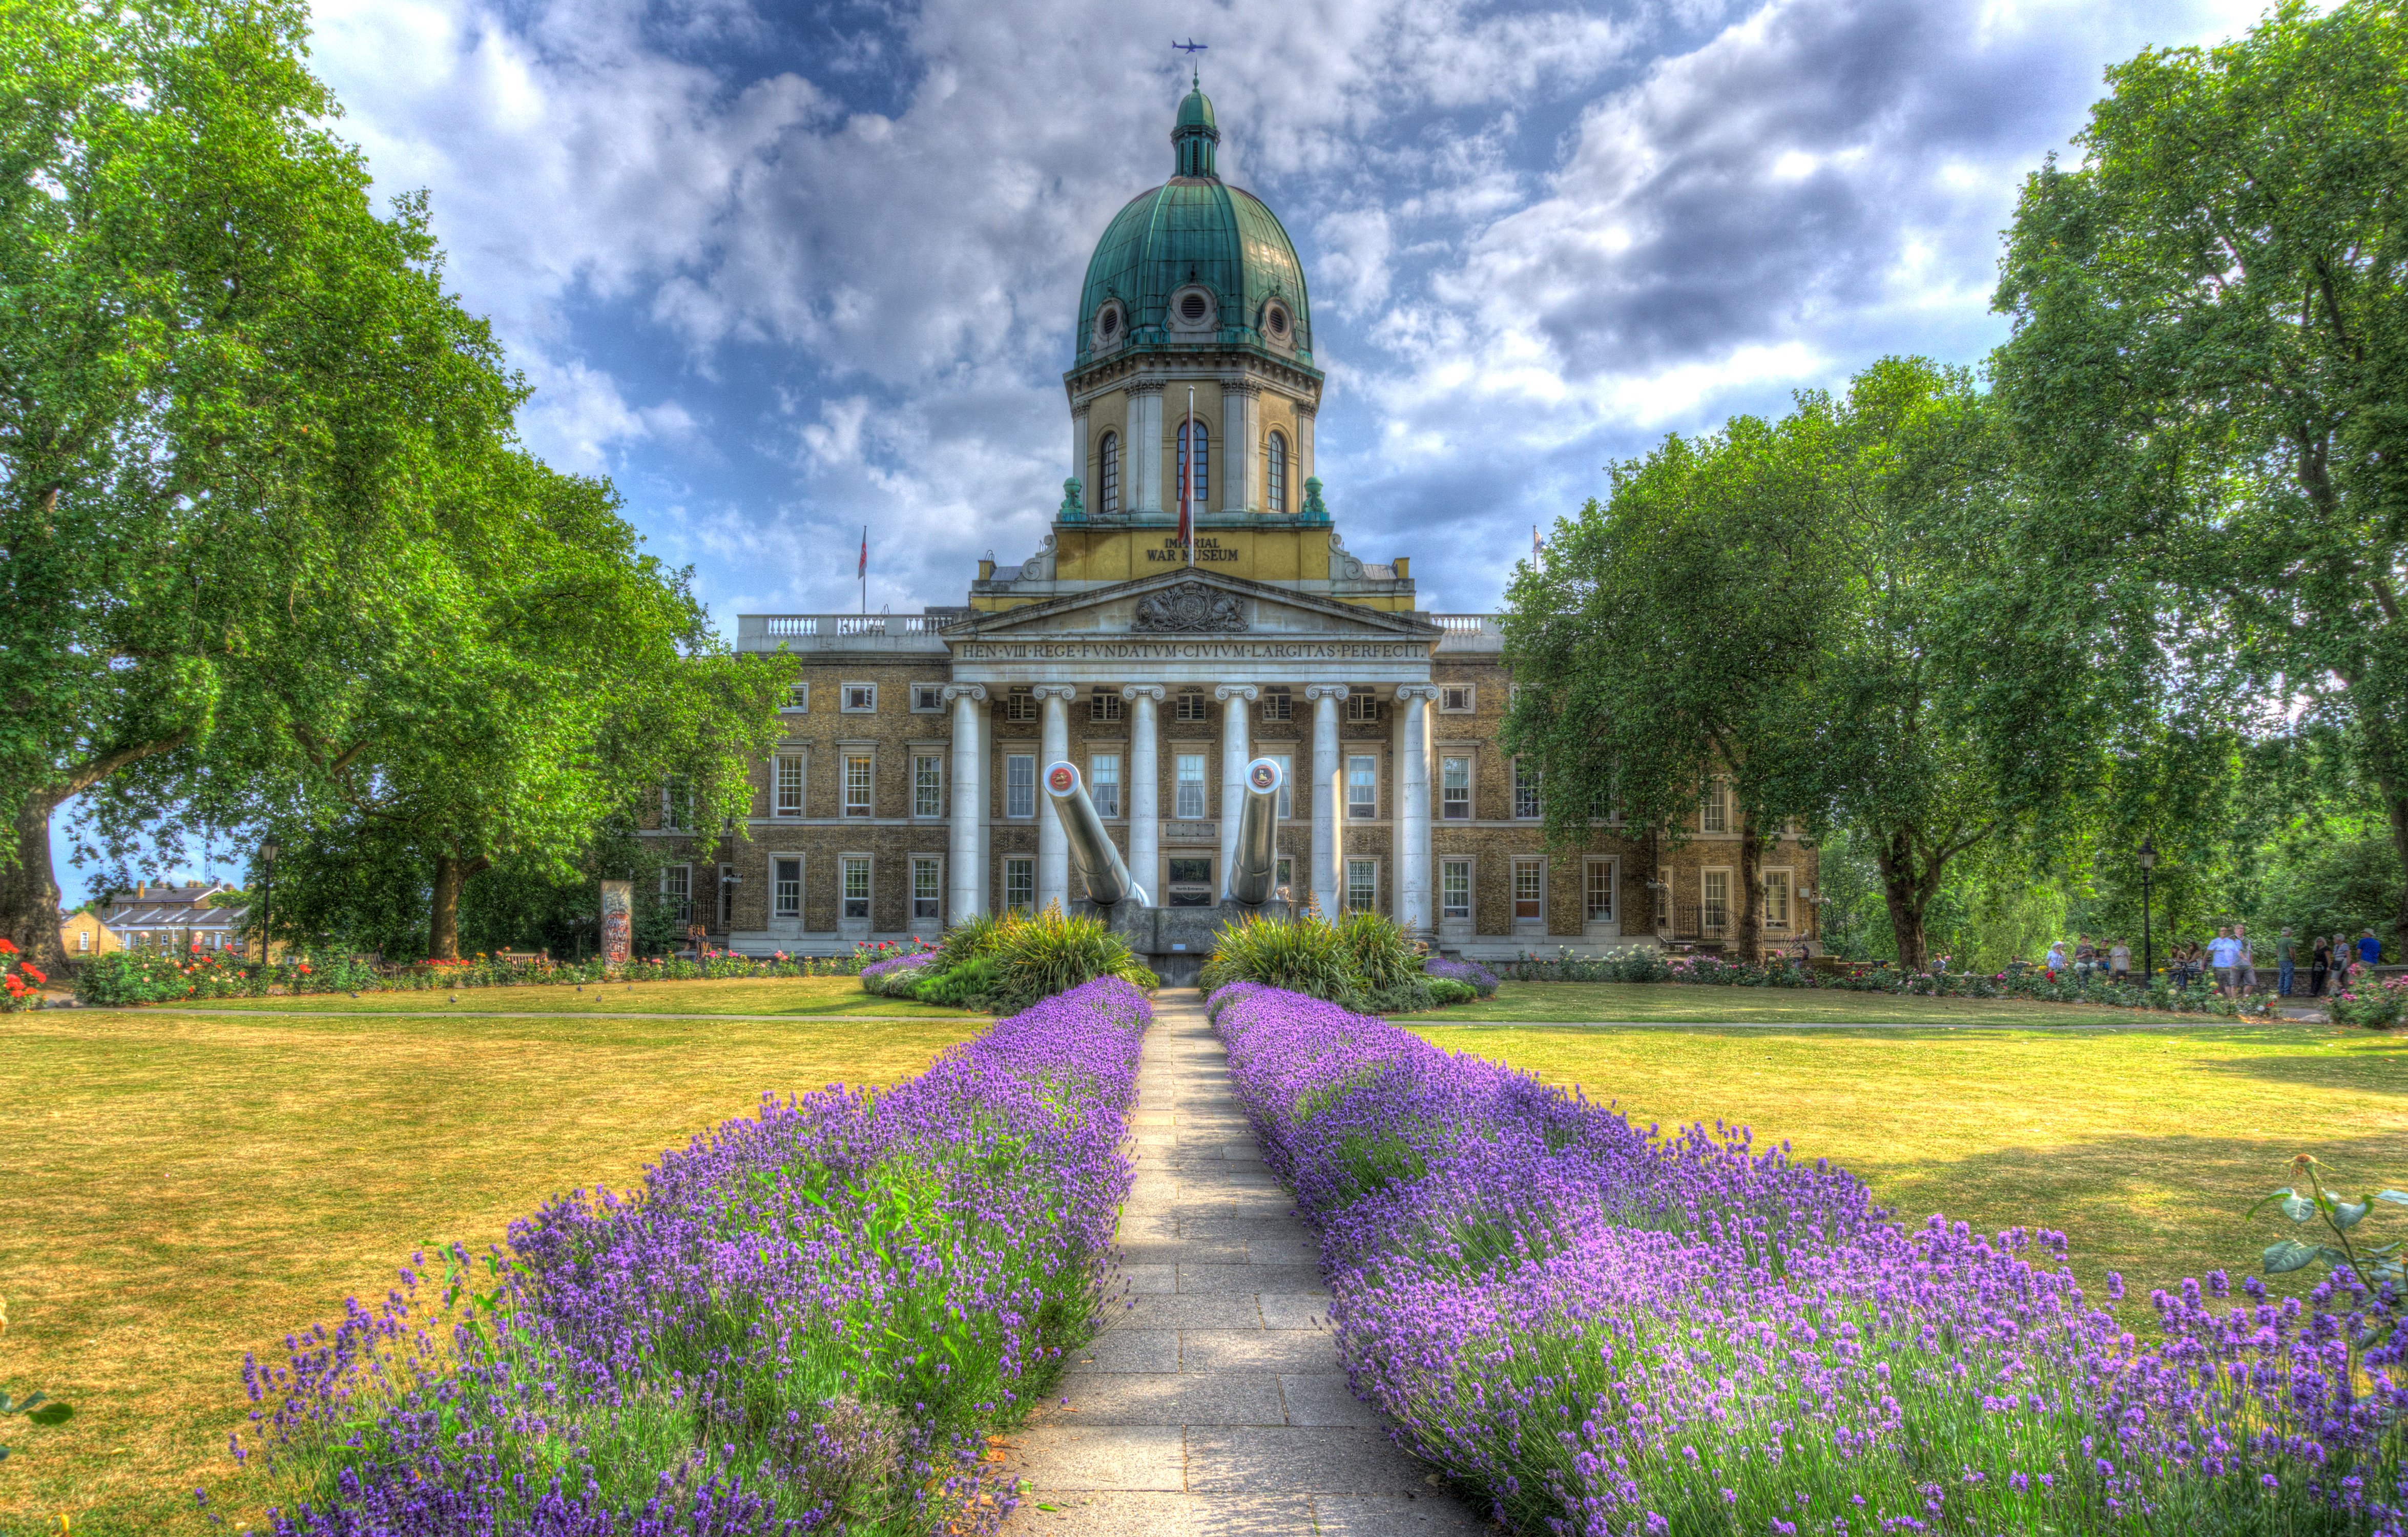 united, Kingdom, Houses, Lavandula, London, Lawn, Hdr, Imperial, War, Museums, Cities Wallpaper